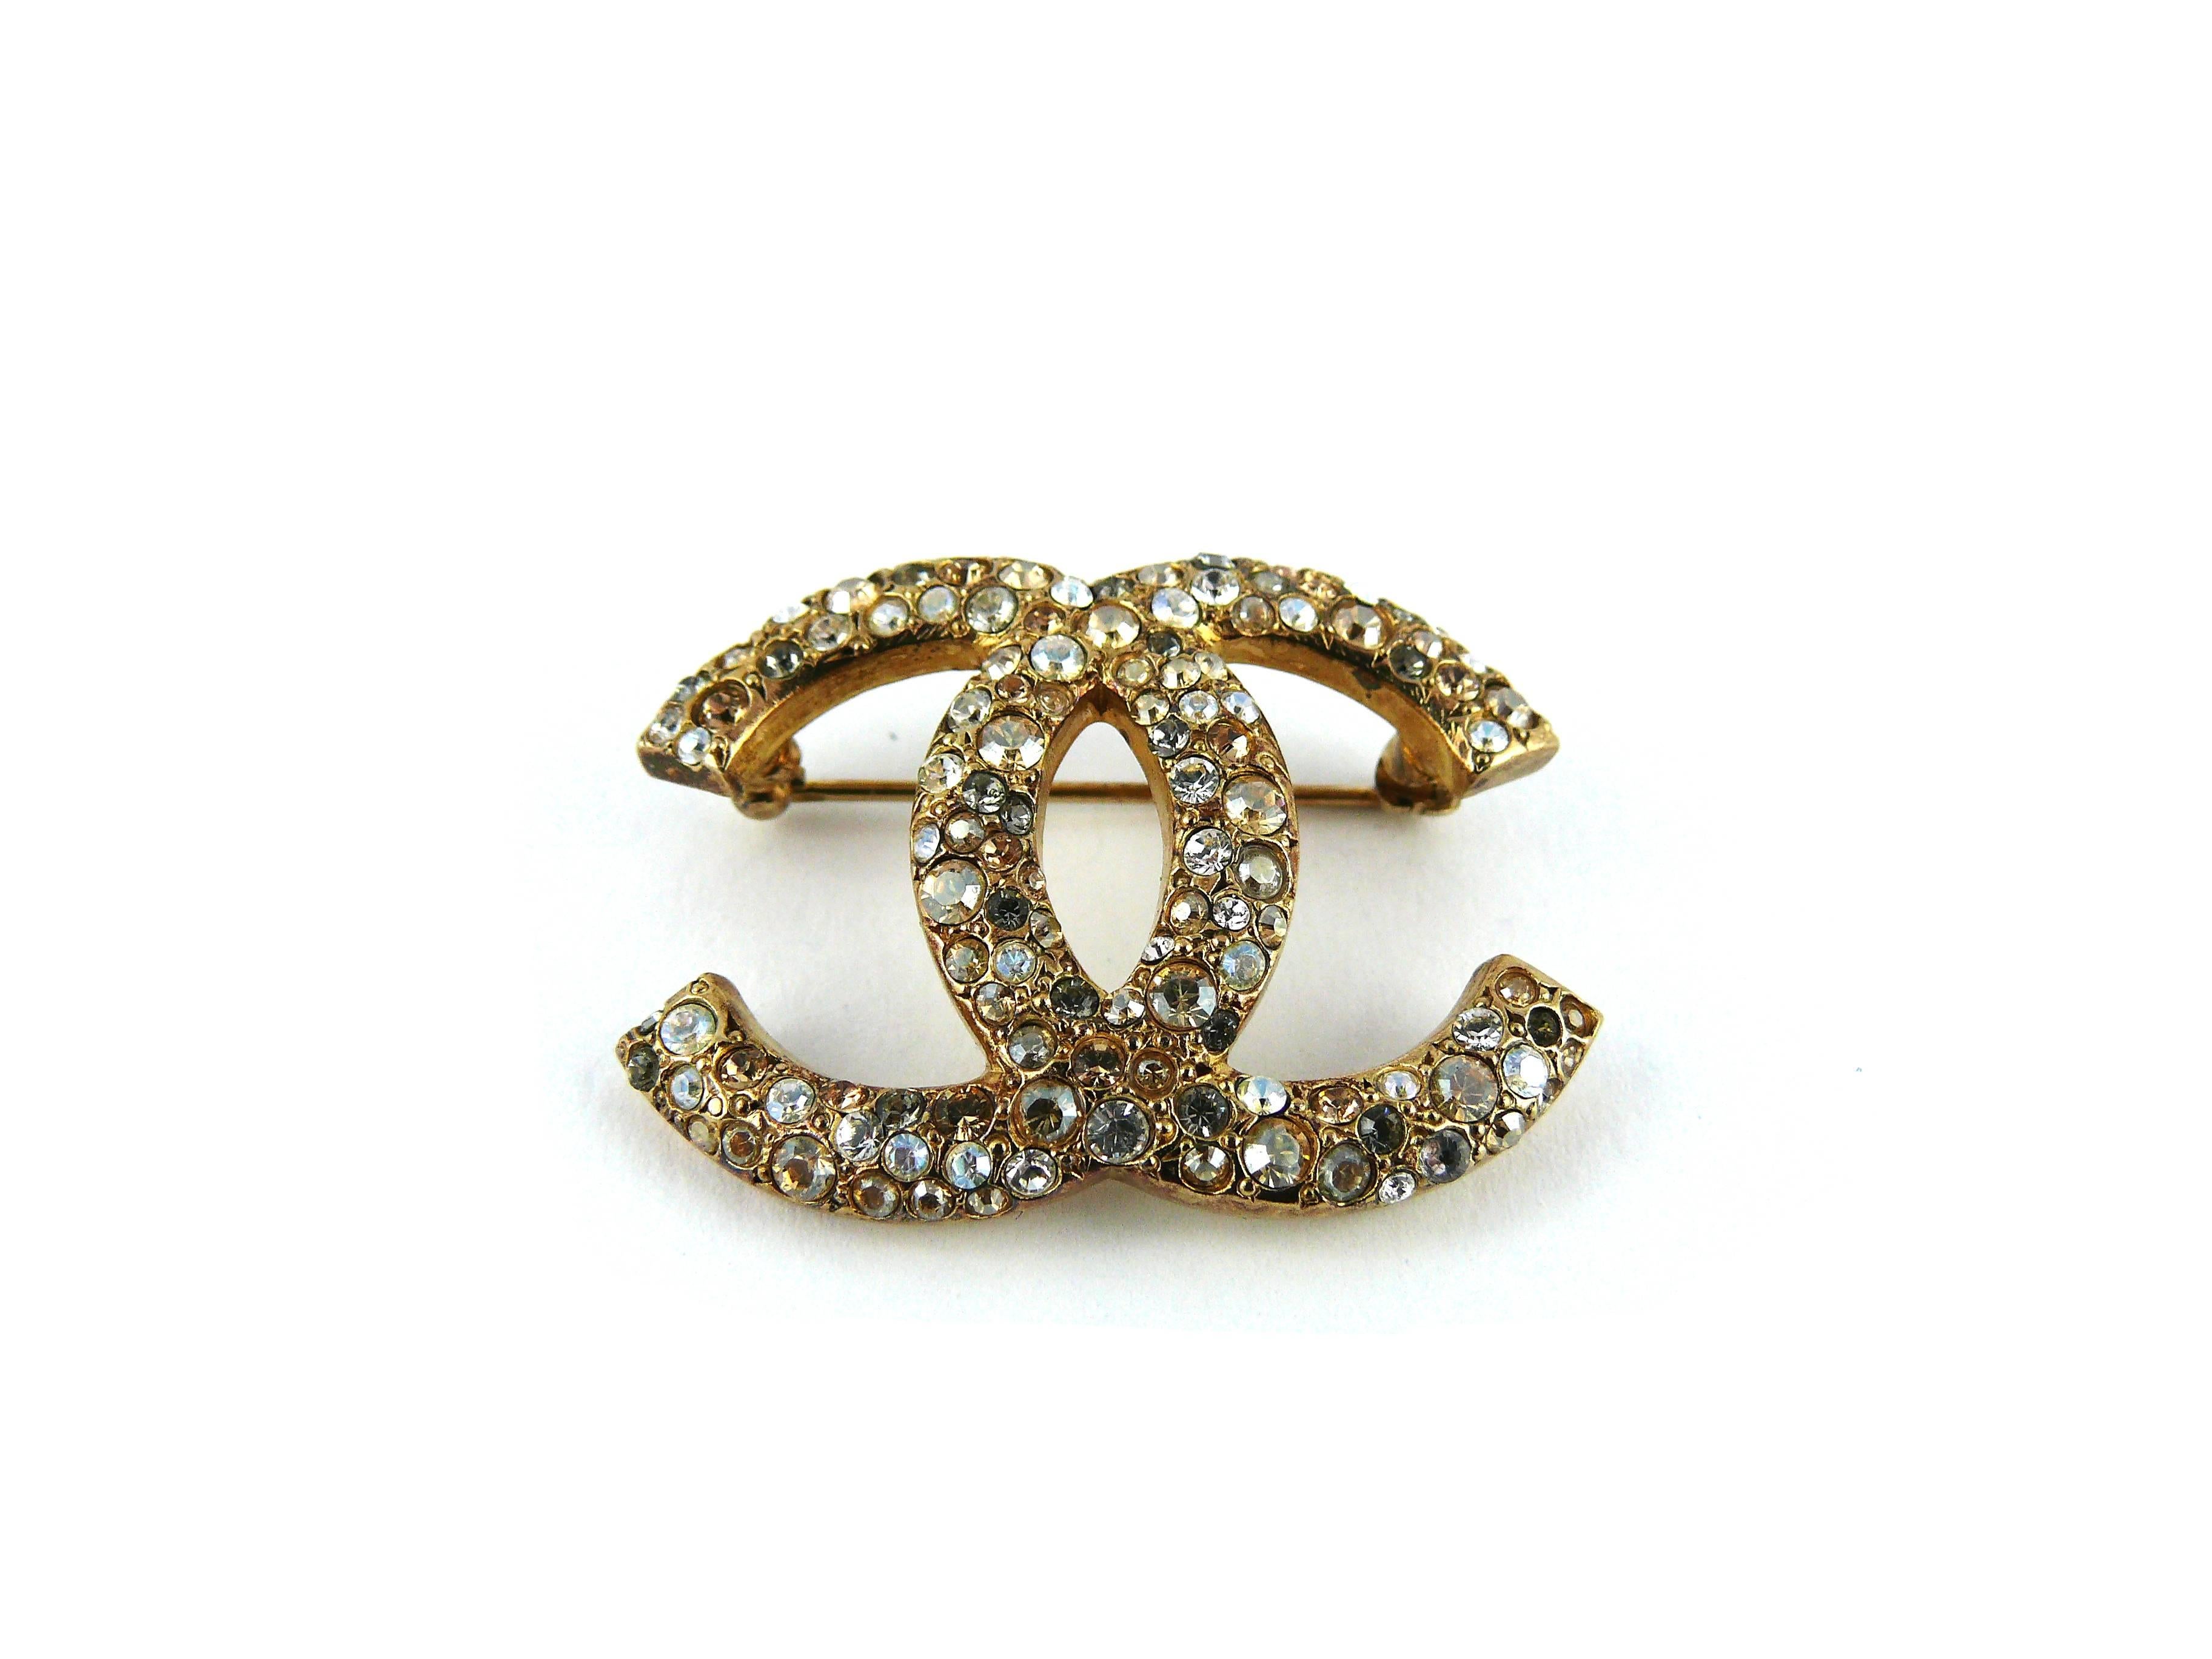 CHANEL gorgeous gold tone CC brooch with multicolor (white, grey, champagne) rhinestone embellishement.

Fall 2007.

Marked CHANEL 07 A Made in France.

JEWELRY CONDITION CHART
- New or never worn : item is in pristine condition with no